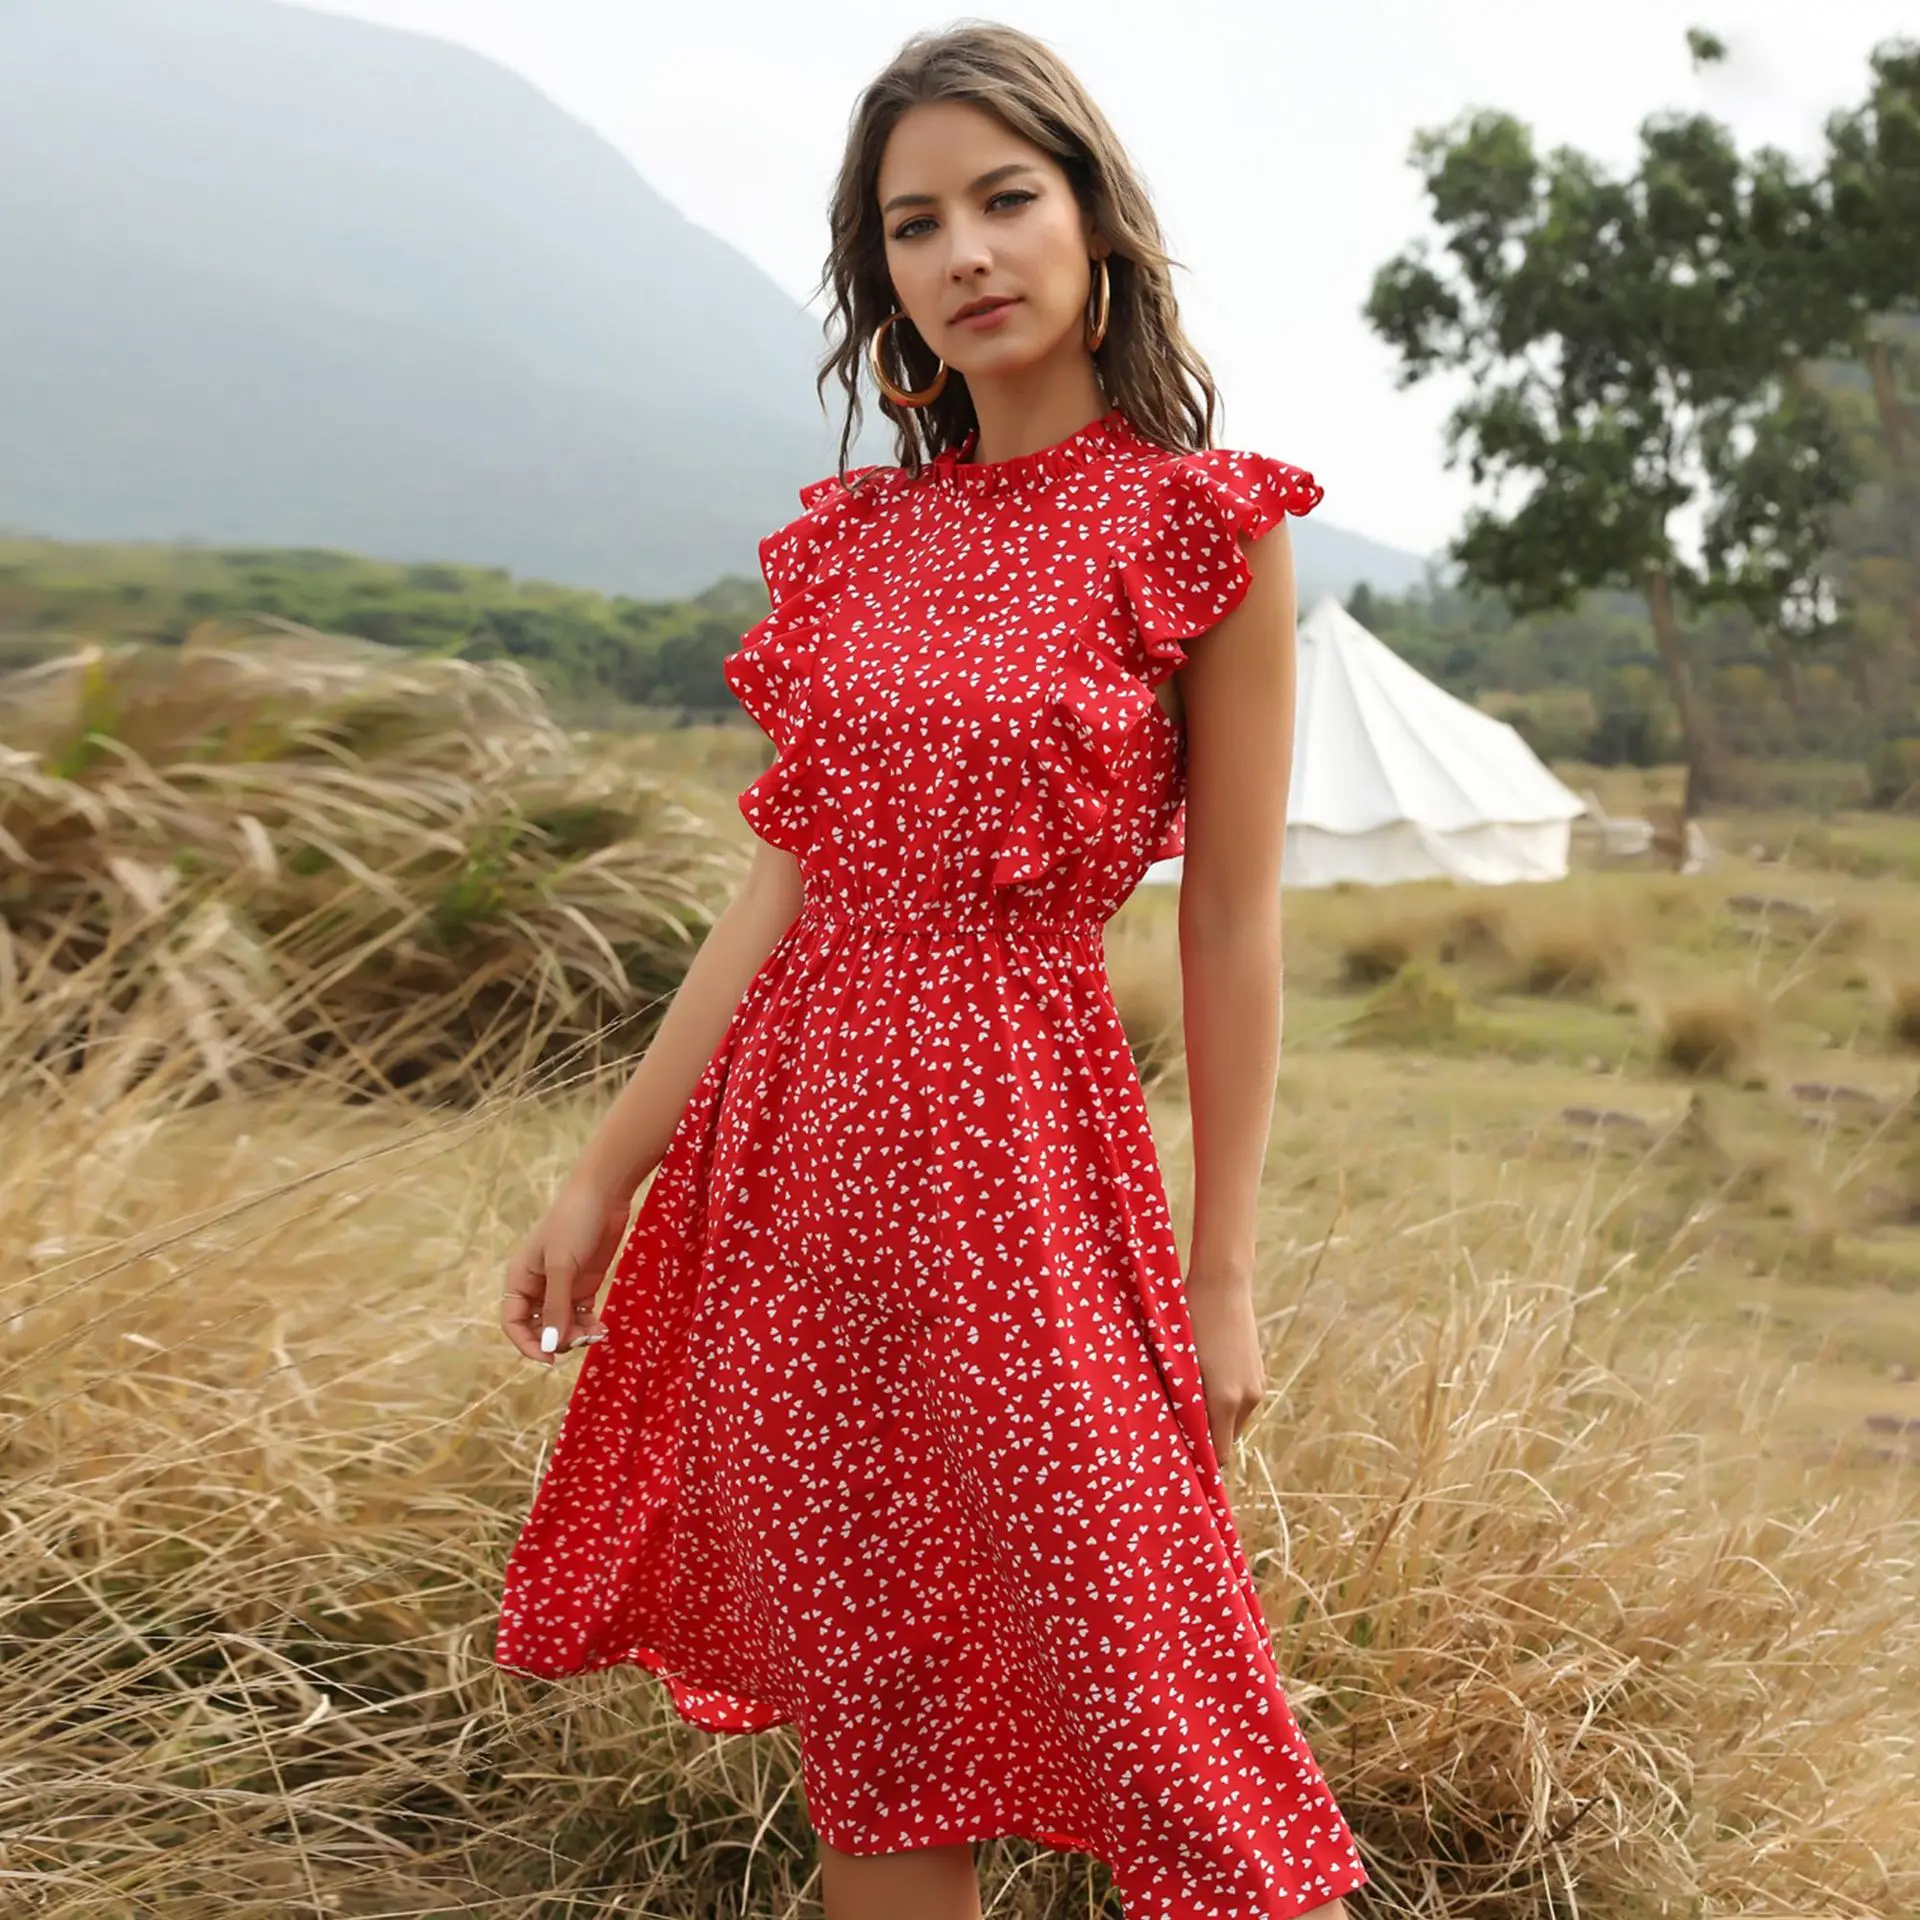 

Chiffon Dress Women Elegant Summer Floral Print Ruffle A-line Sundress Casual Fitted Clothes To Knees 2020 Red Dresses For Women